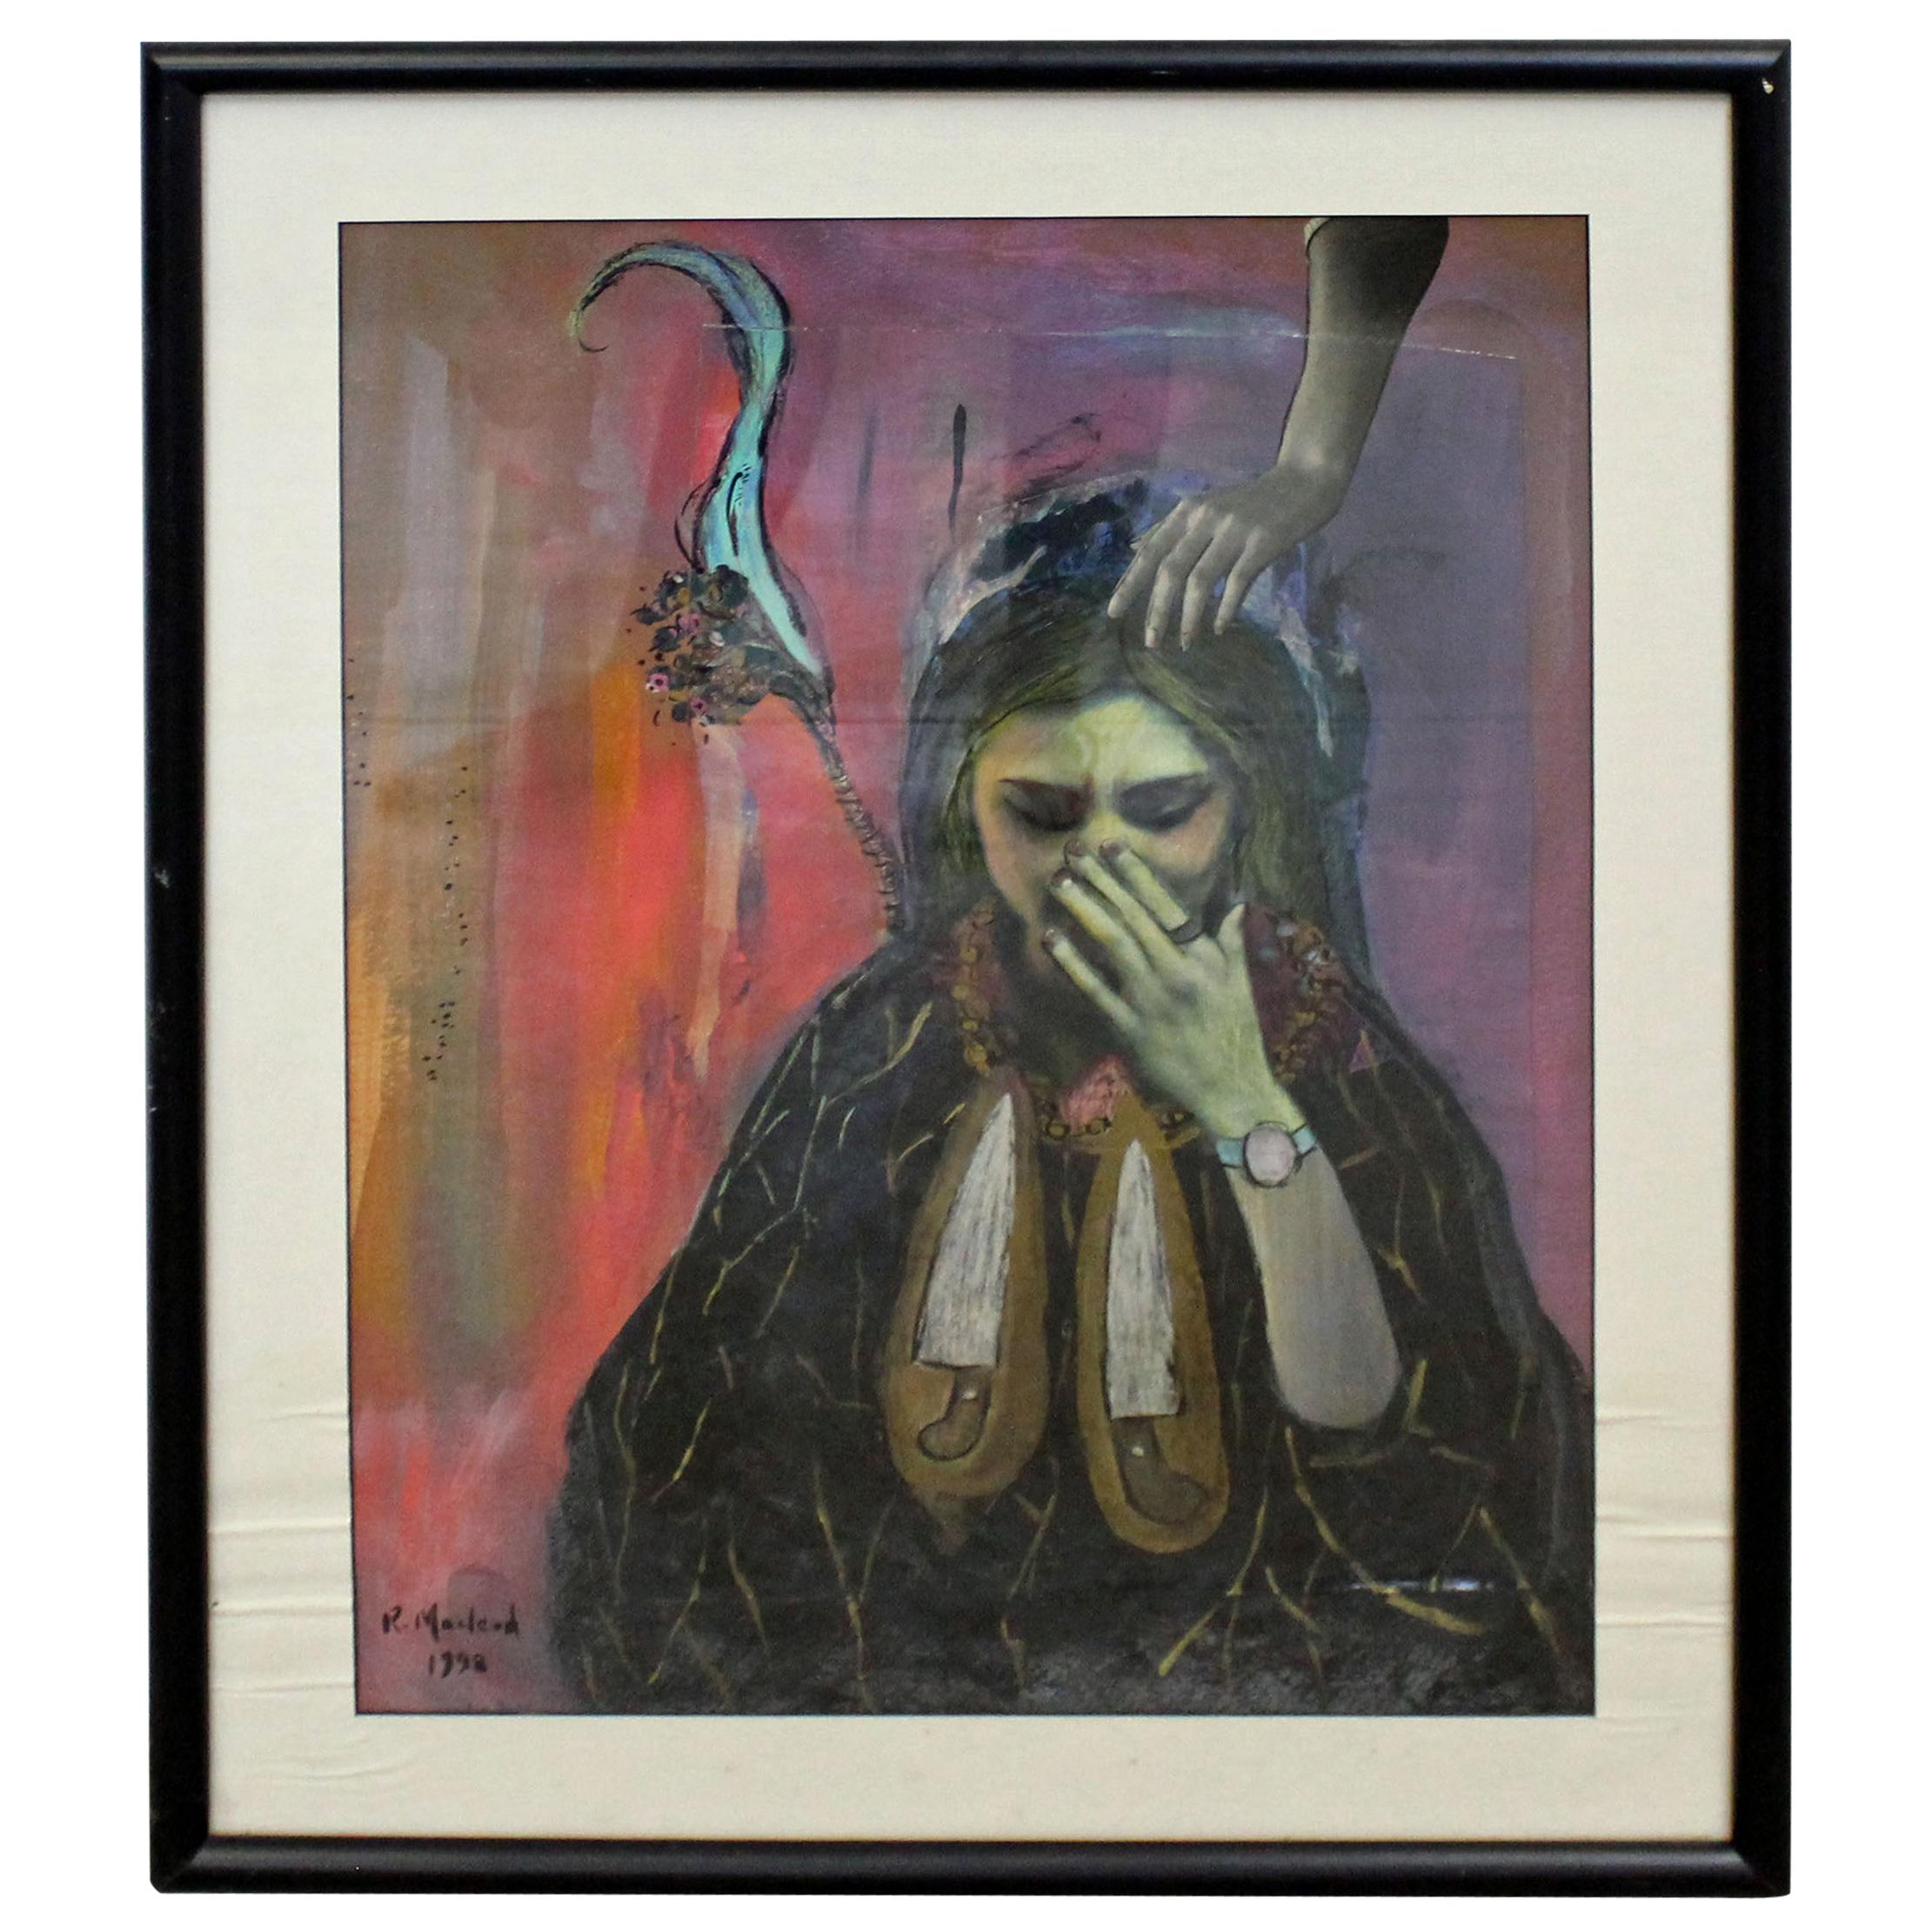 Vintage Modern Abstract Oil 'Sorrow' Painting of Woman Crying by R. Macleod For Sale